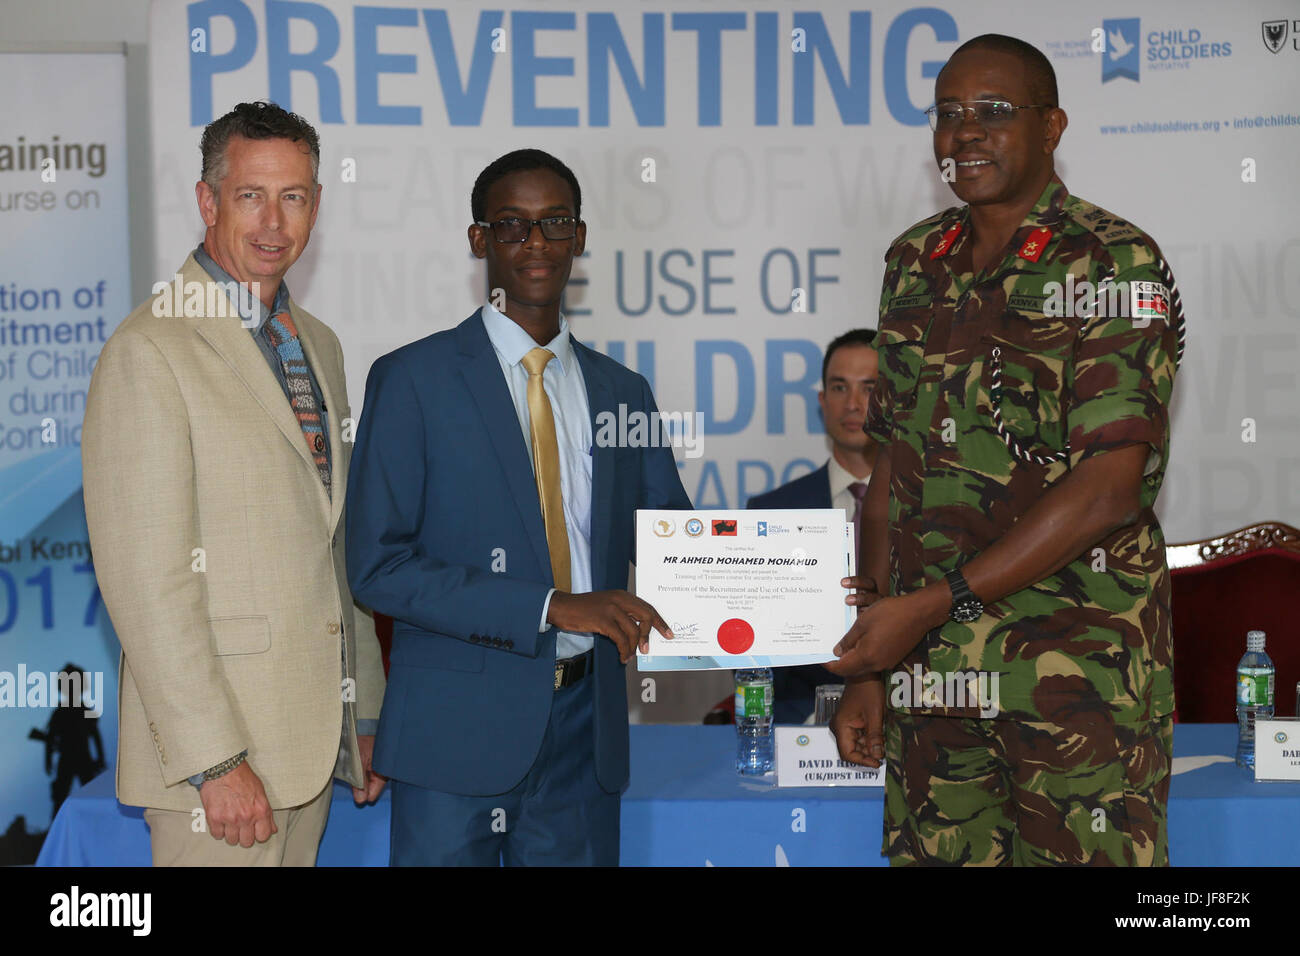 Brigadier Patrick Muta Nderitu (right) the Director of the International Peace and Security Training Centre (IPSTC) and Darin Reeves (left), the Lead Facilitator of the Romeo Dallaire Child Soldiers Initiative, present a certificate to Mr. Ahmed Mohamed Mohamud from Somali Police Force after successful completion of the AMISOM Training of Trainers course on the prevention of the recruitment and use of children as weapons of war, for security sector actors at the International Peace and Security Training Centre, Nairobi, Kenya on May 19, 2017. AMISOM Photo Stock Photo